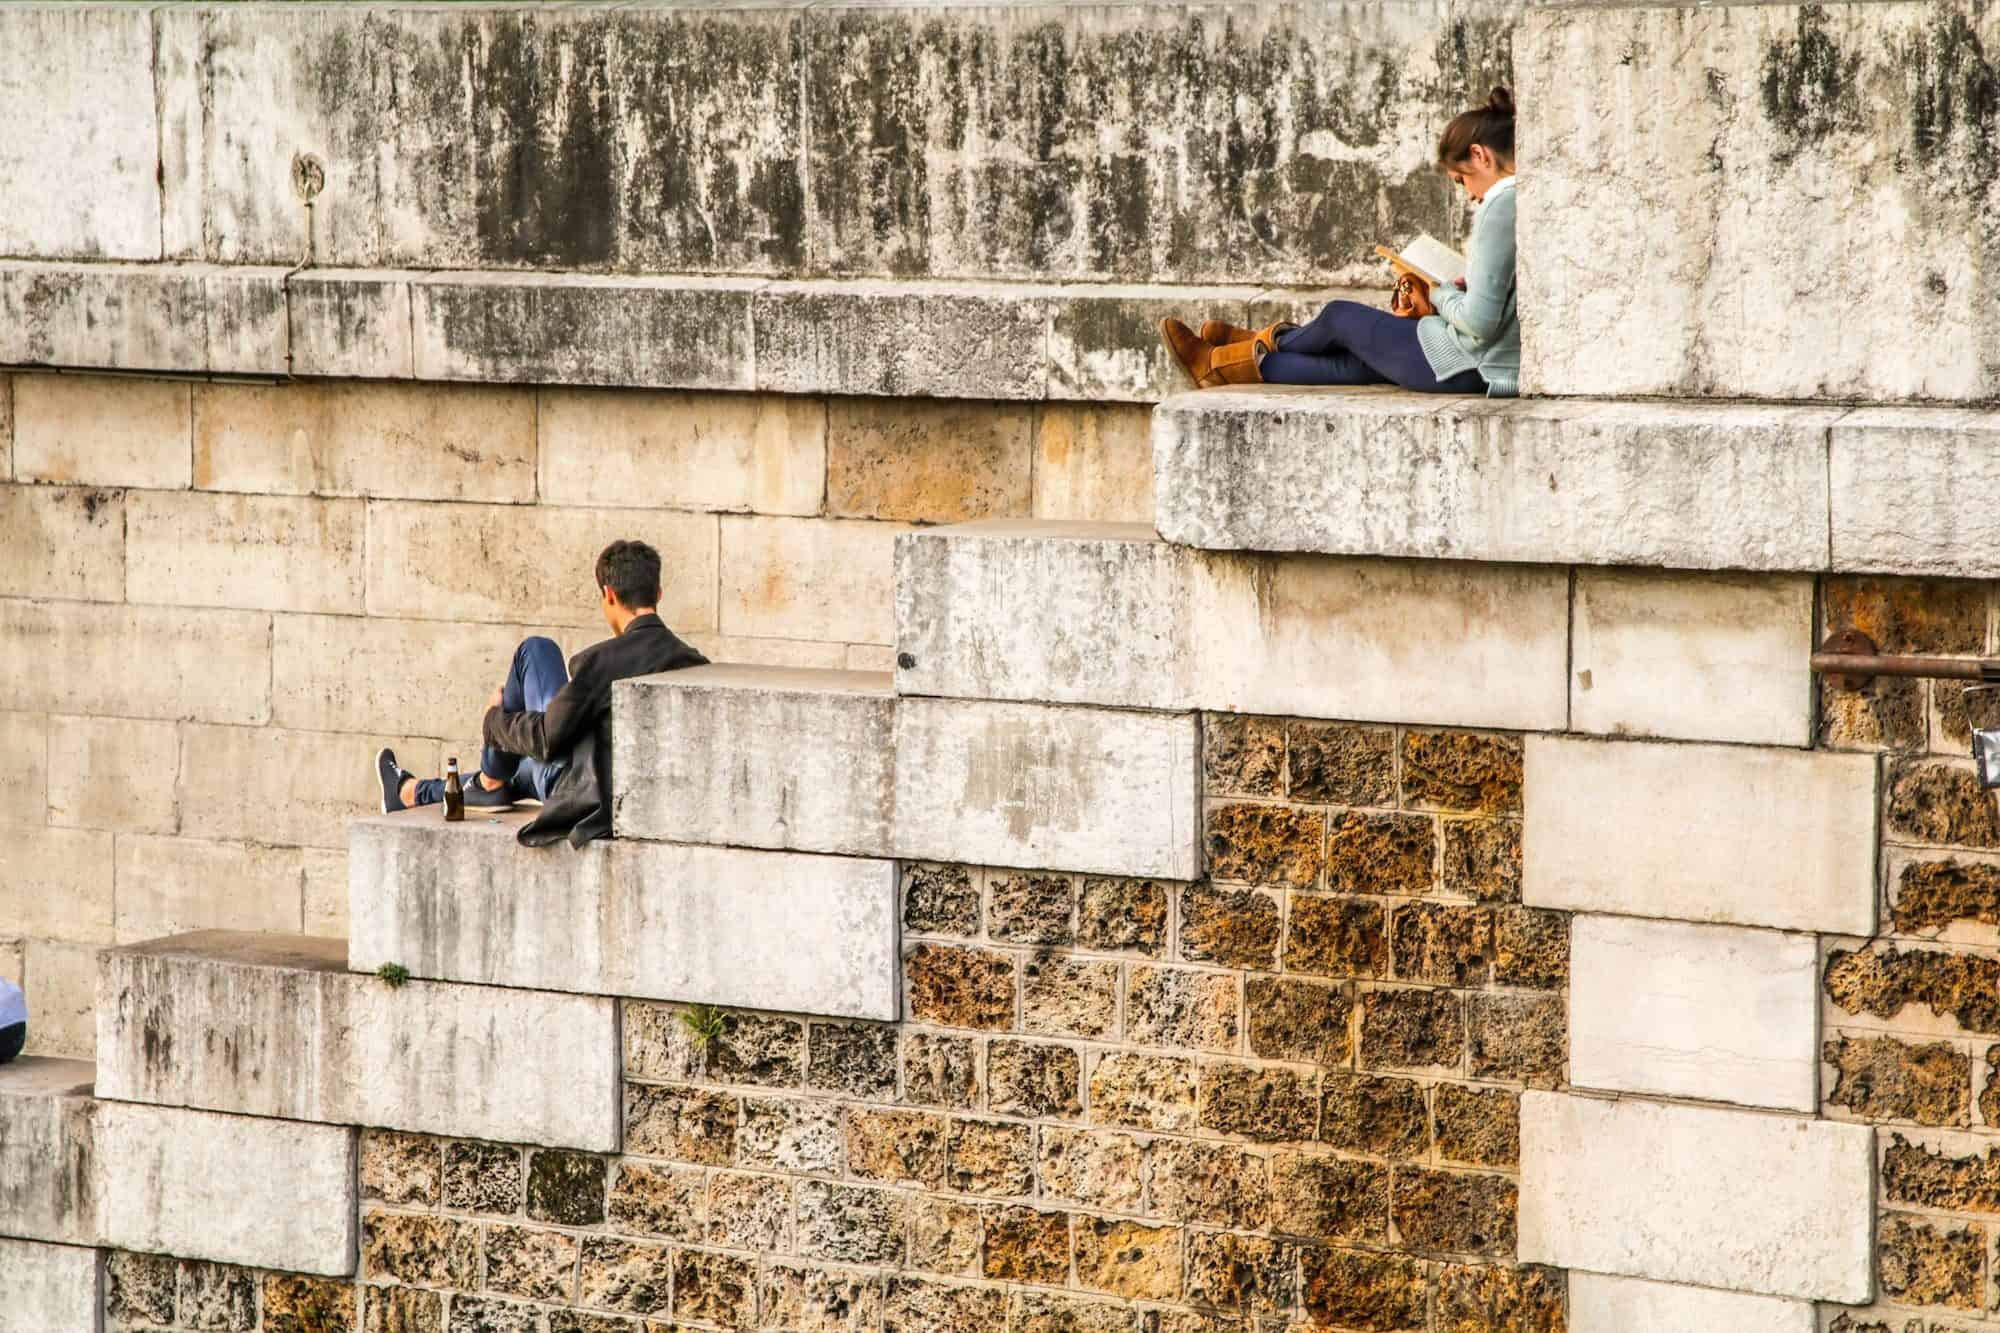 Paris in summer is quiet and it's possible to have its corners to yourself, like these two people reading quietly on the banks of the River Seine.